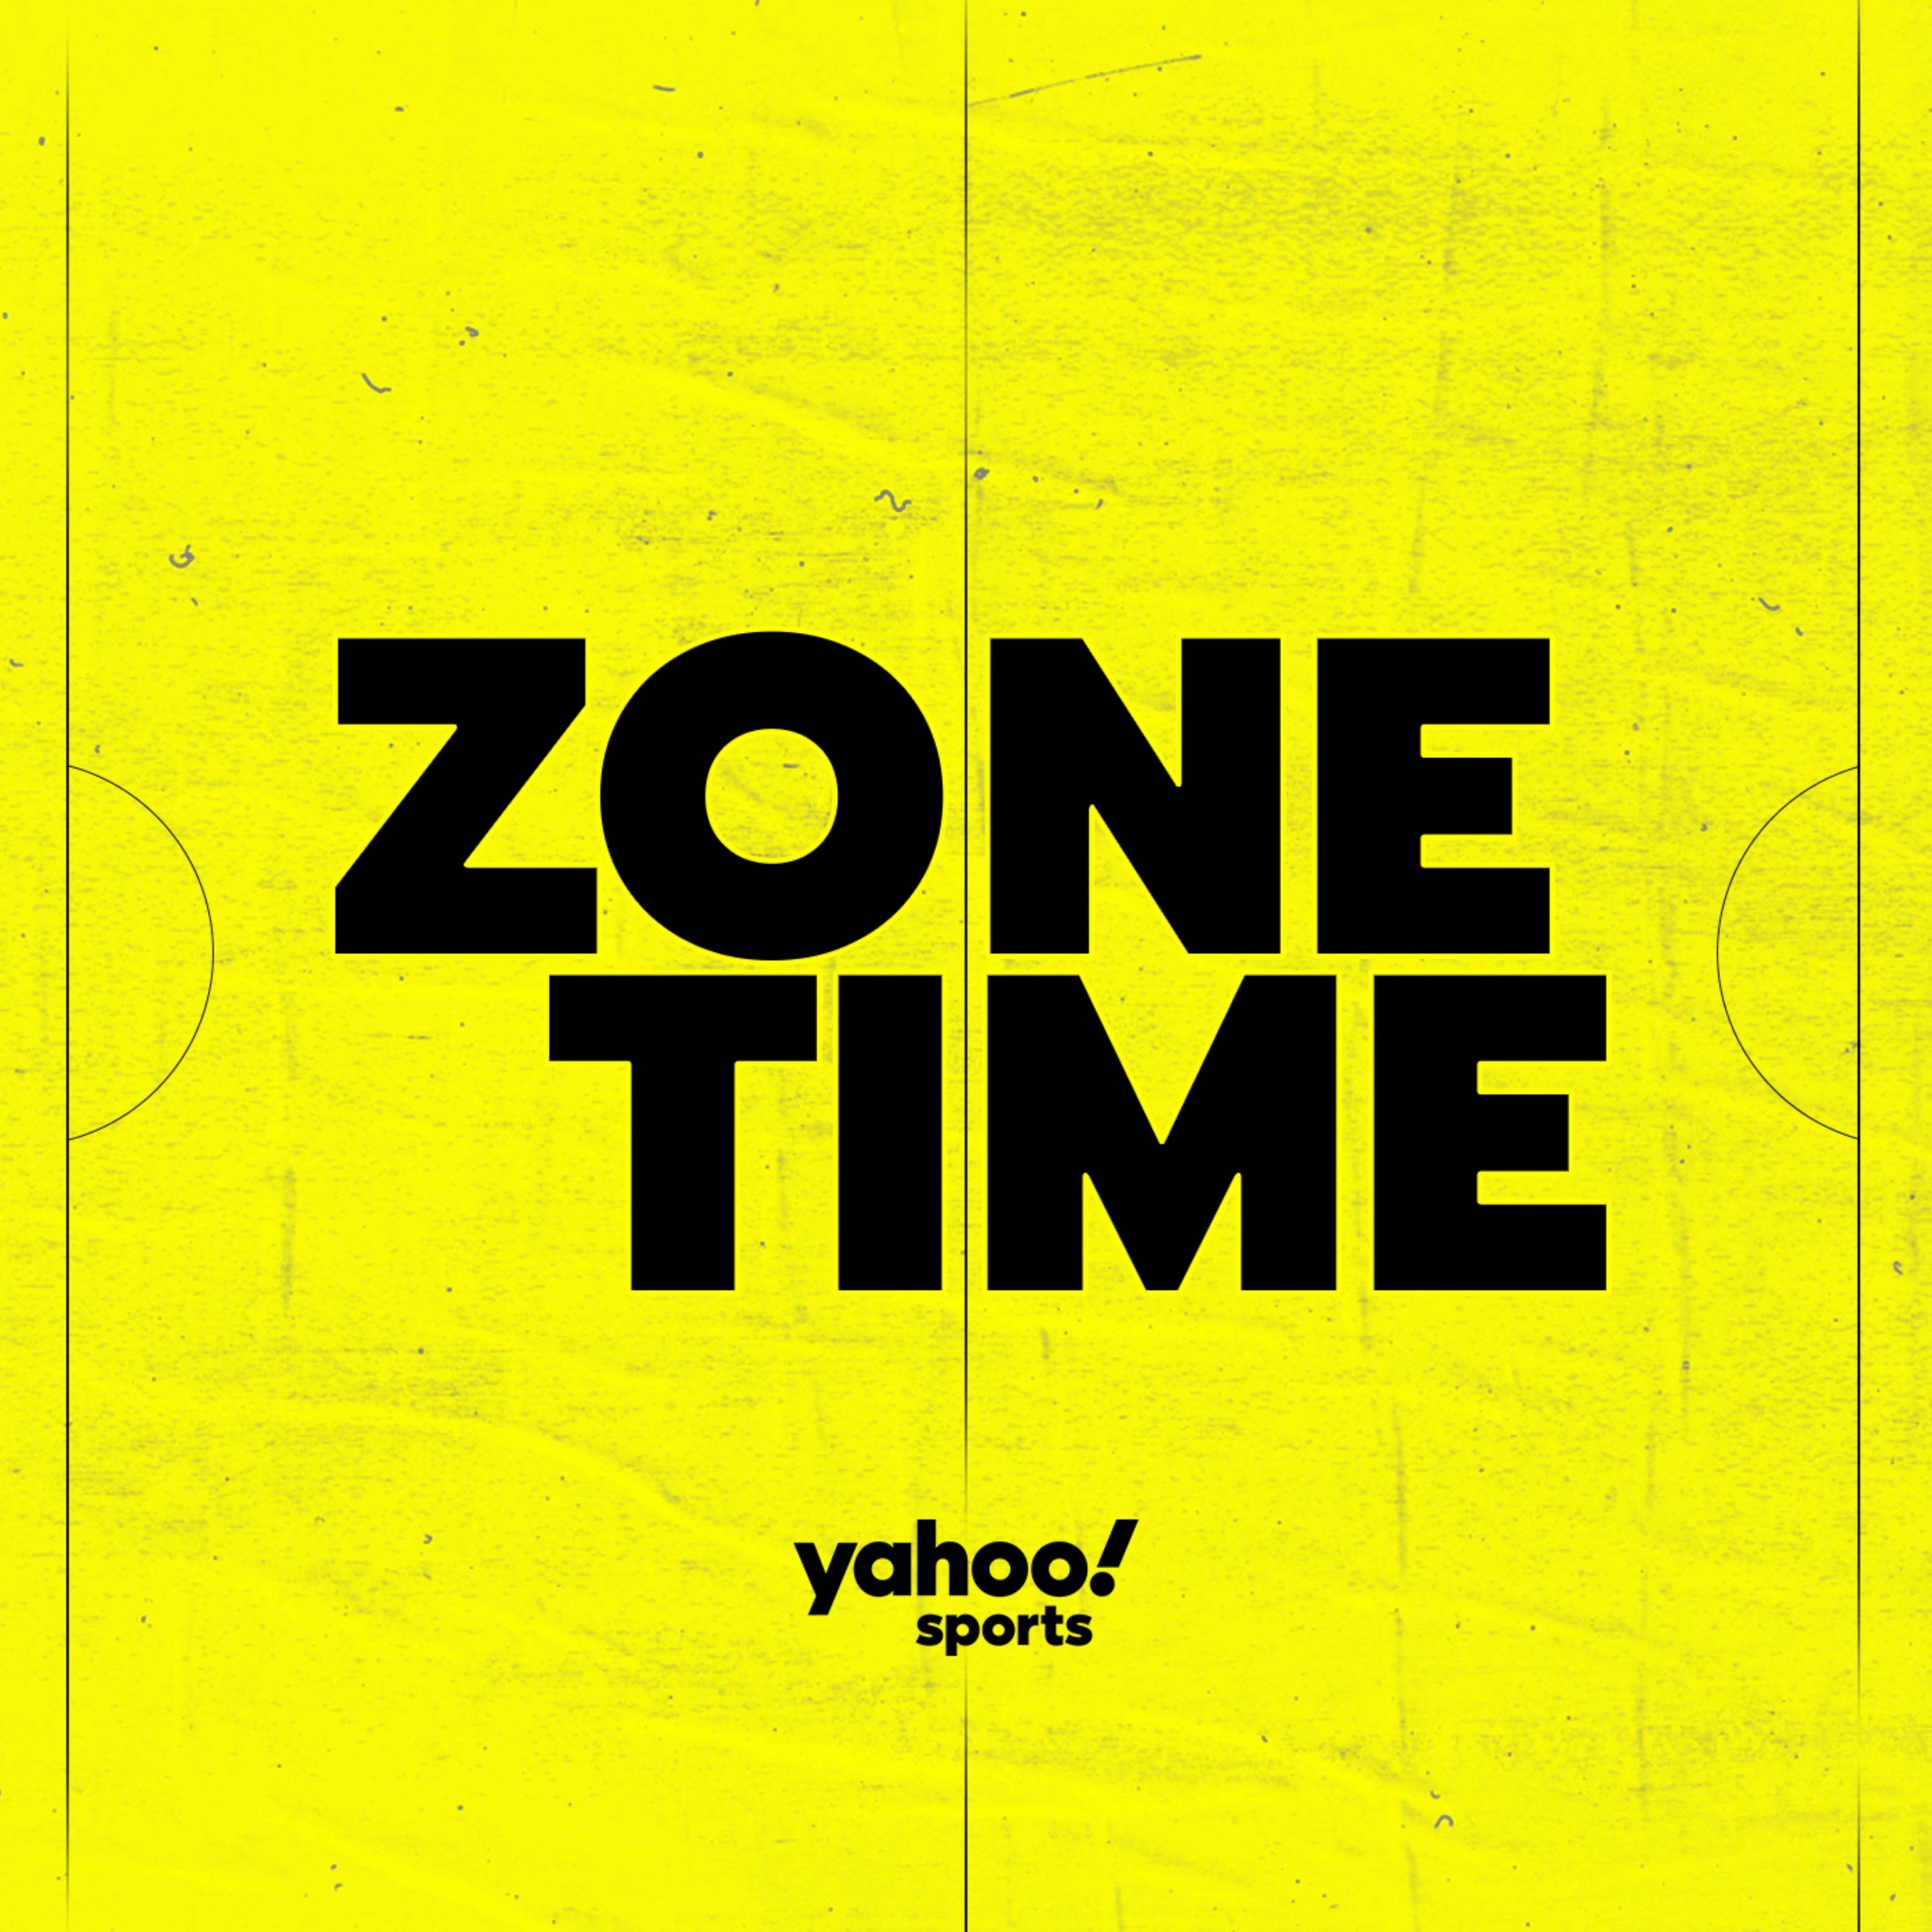 Zone Time: Off-ice controversy dominates as season begins